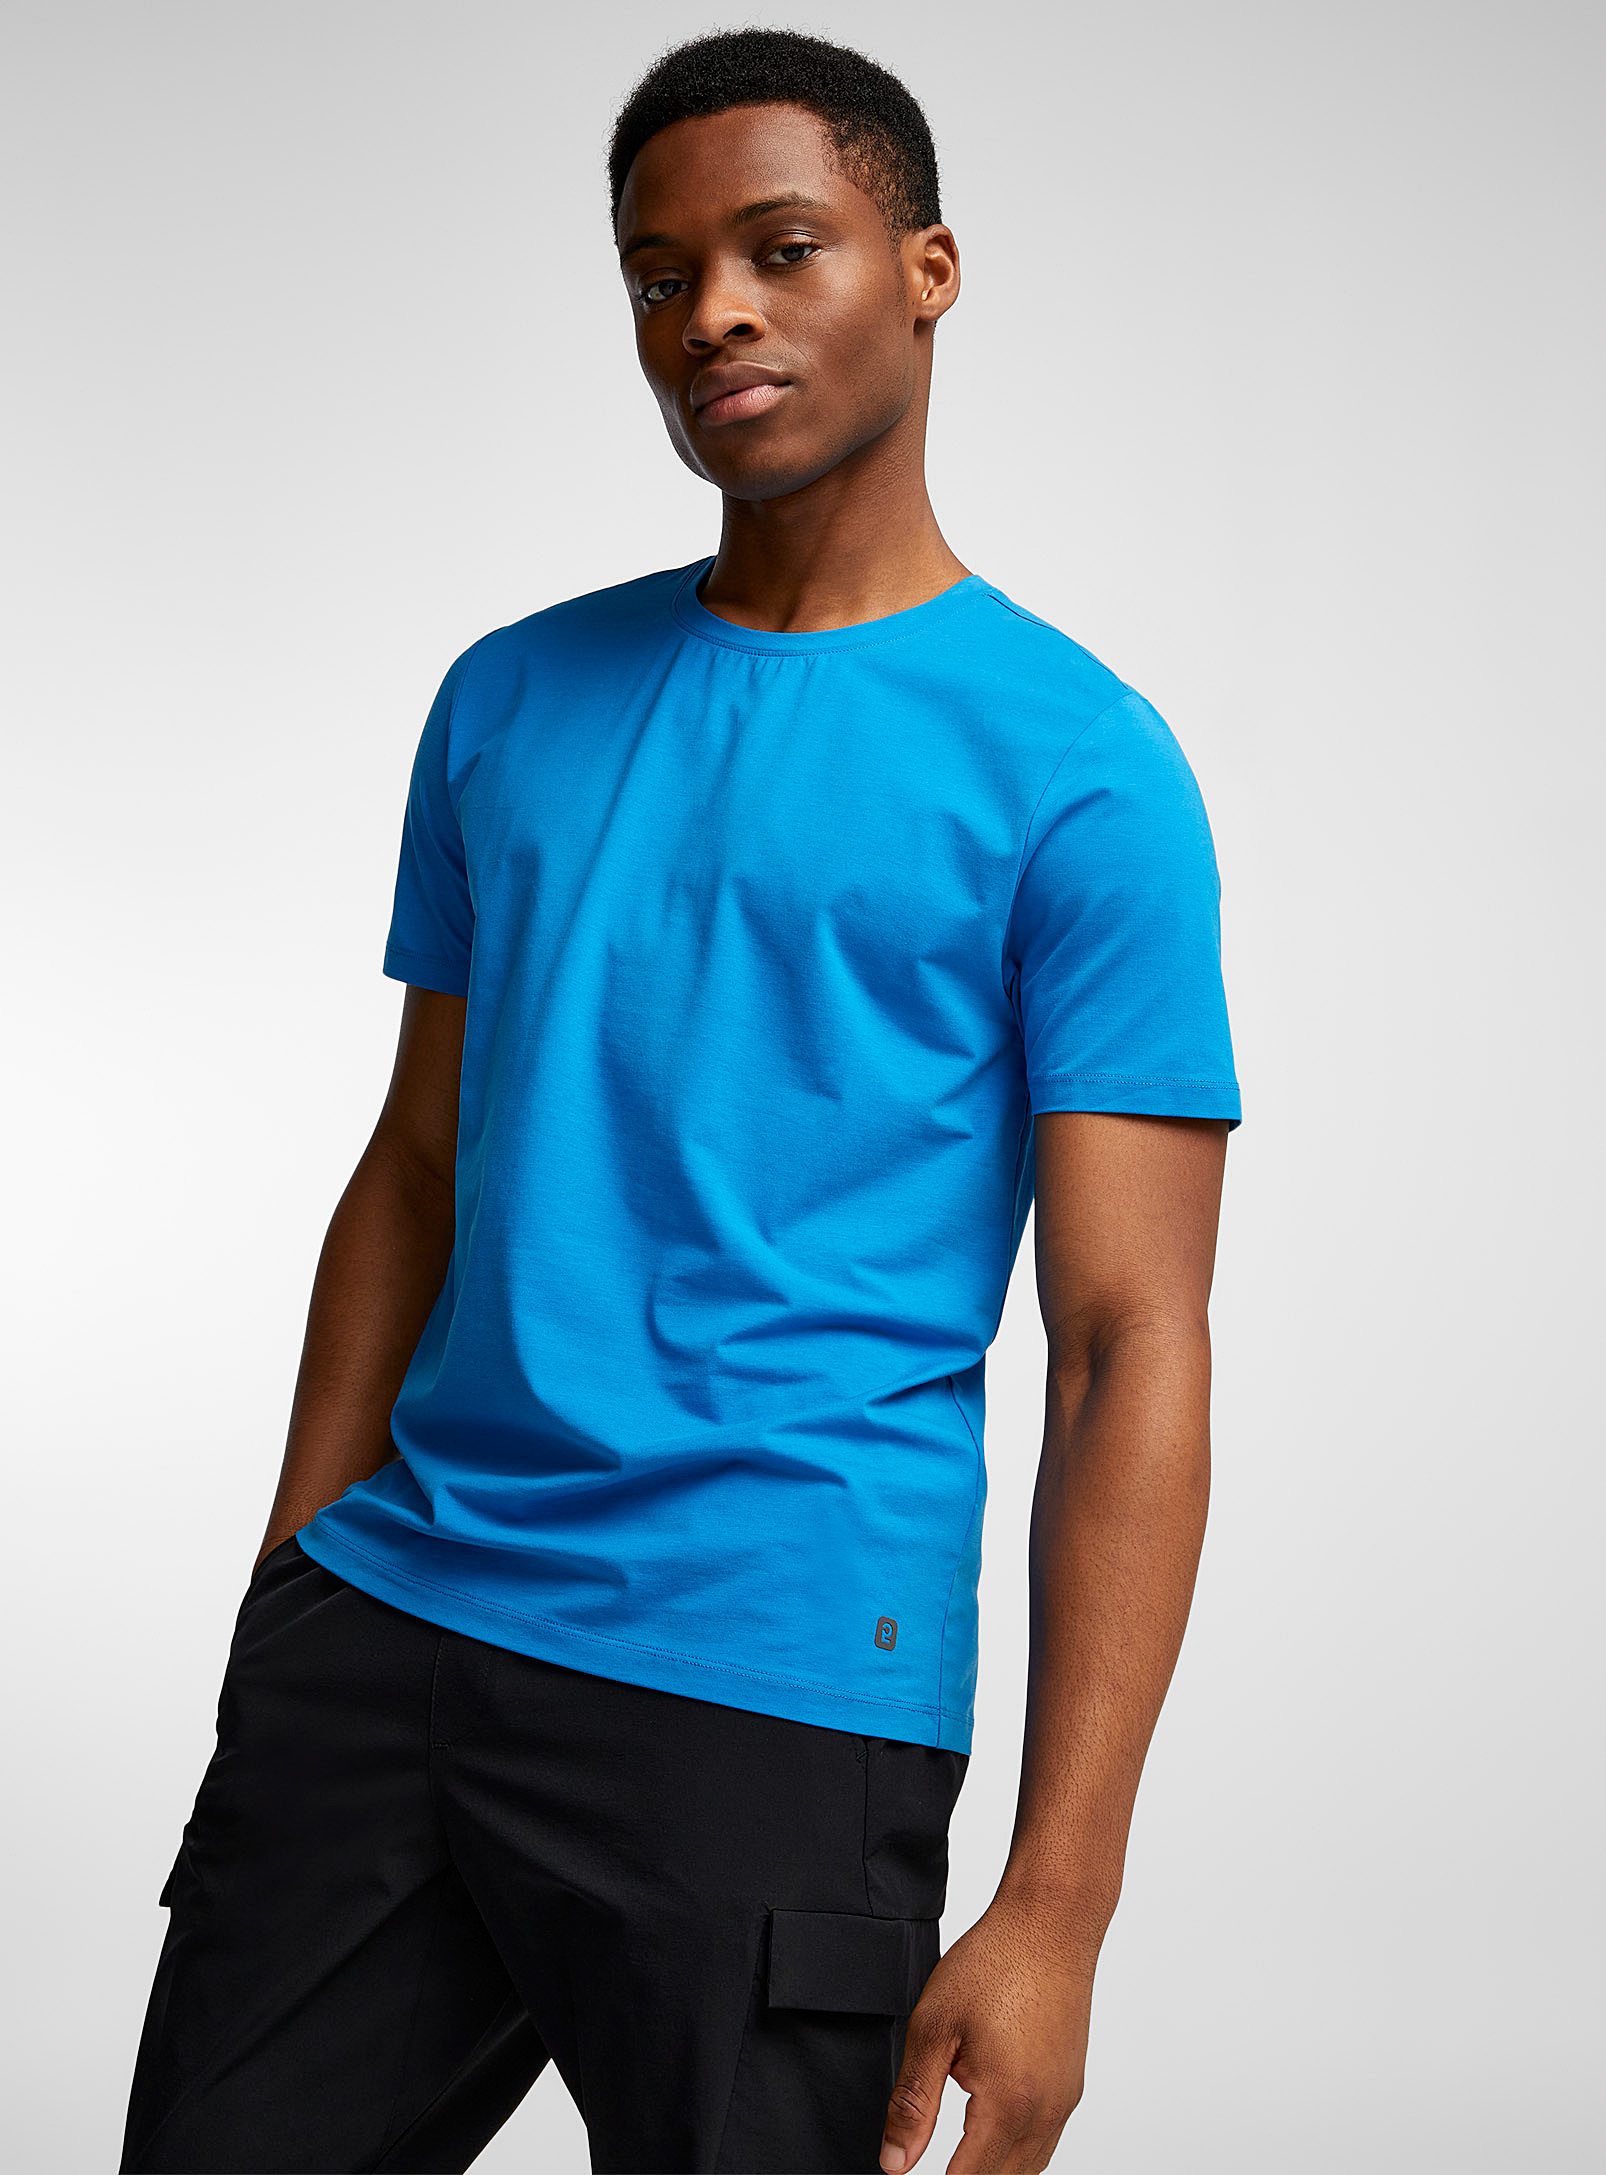 I.fiv5 Cotton-lyocell Stretch Tee In Sapphire Blue